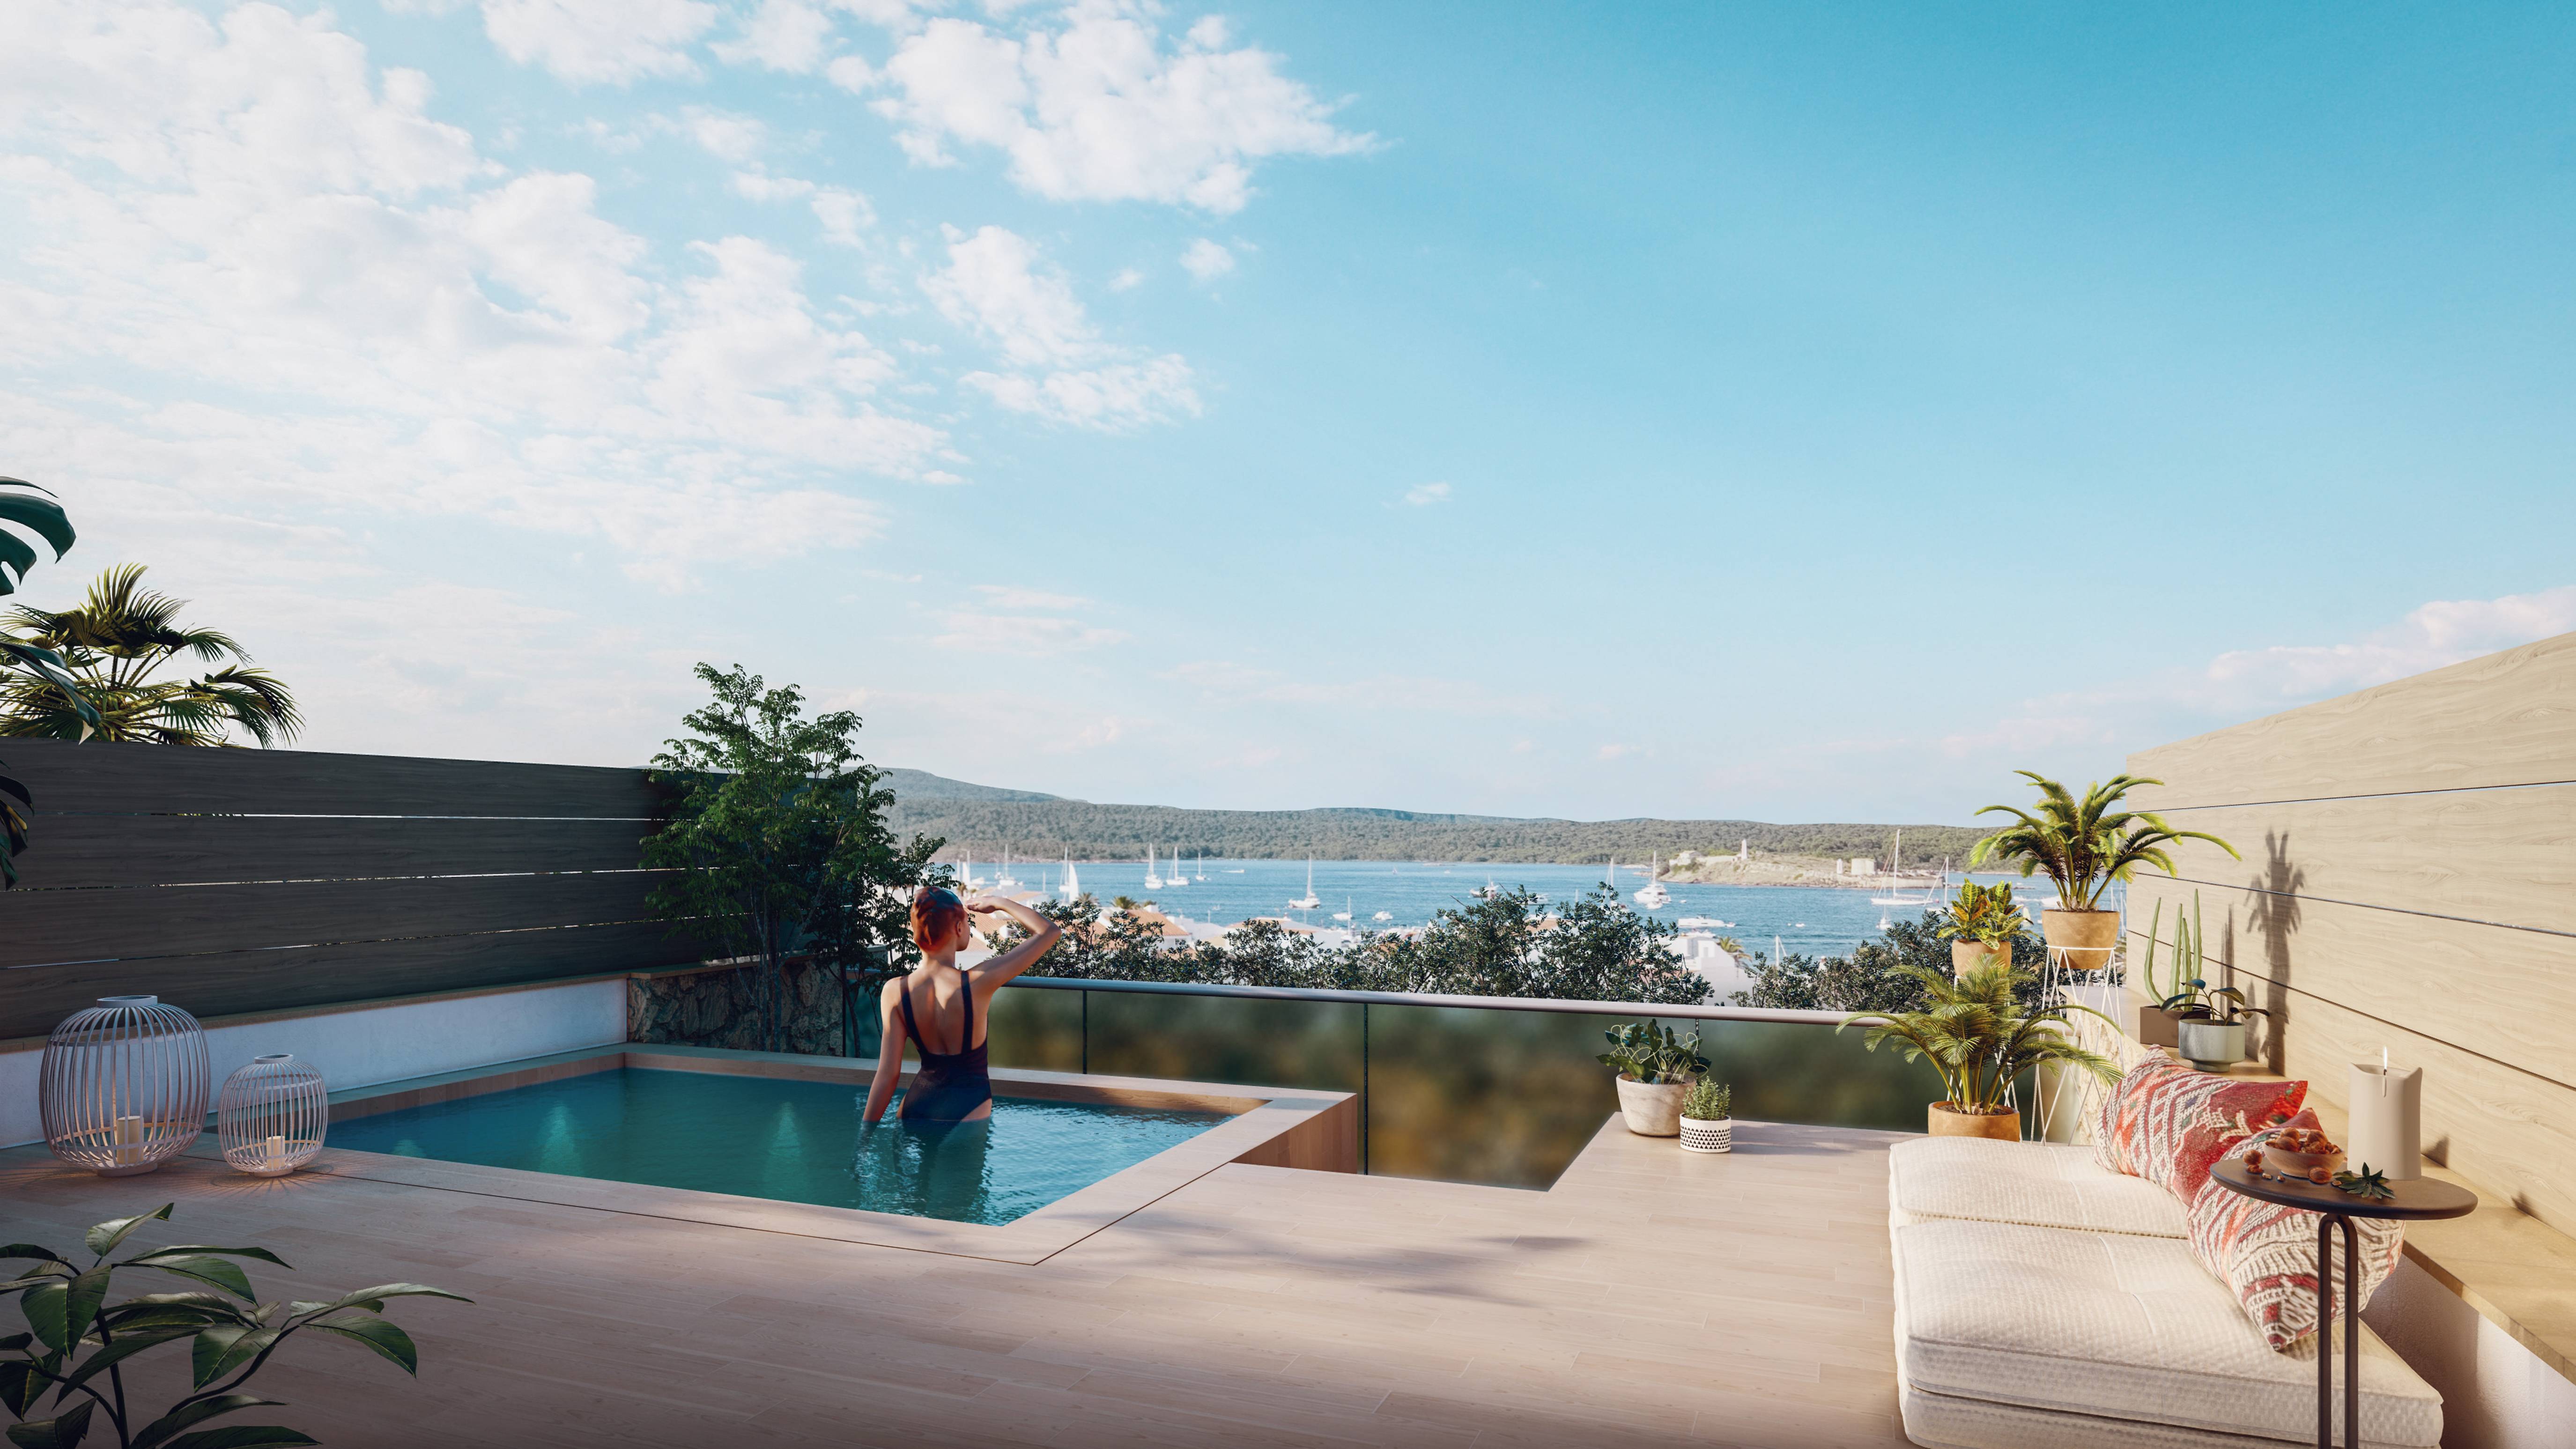 New development - Under construction - Exclusive residential development in the bay of Fornells, Menorca